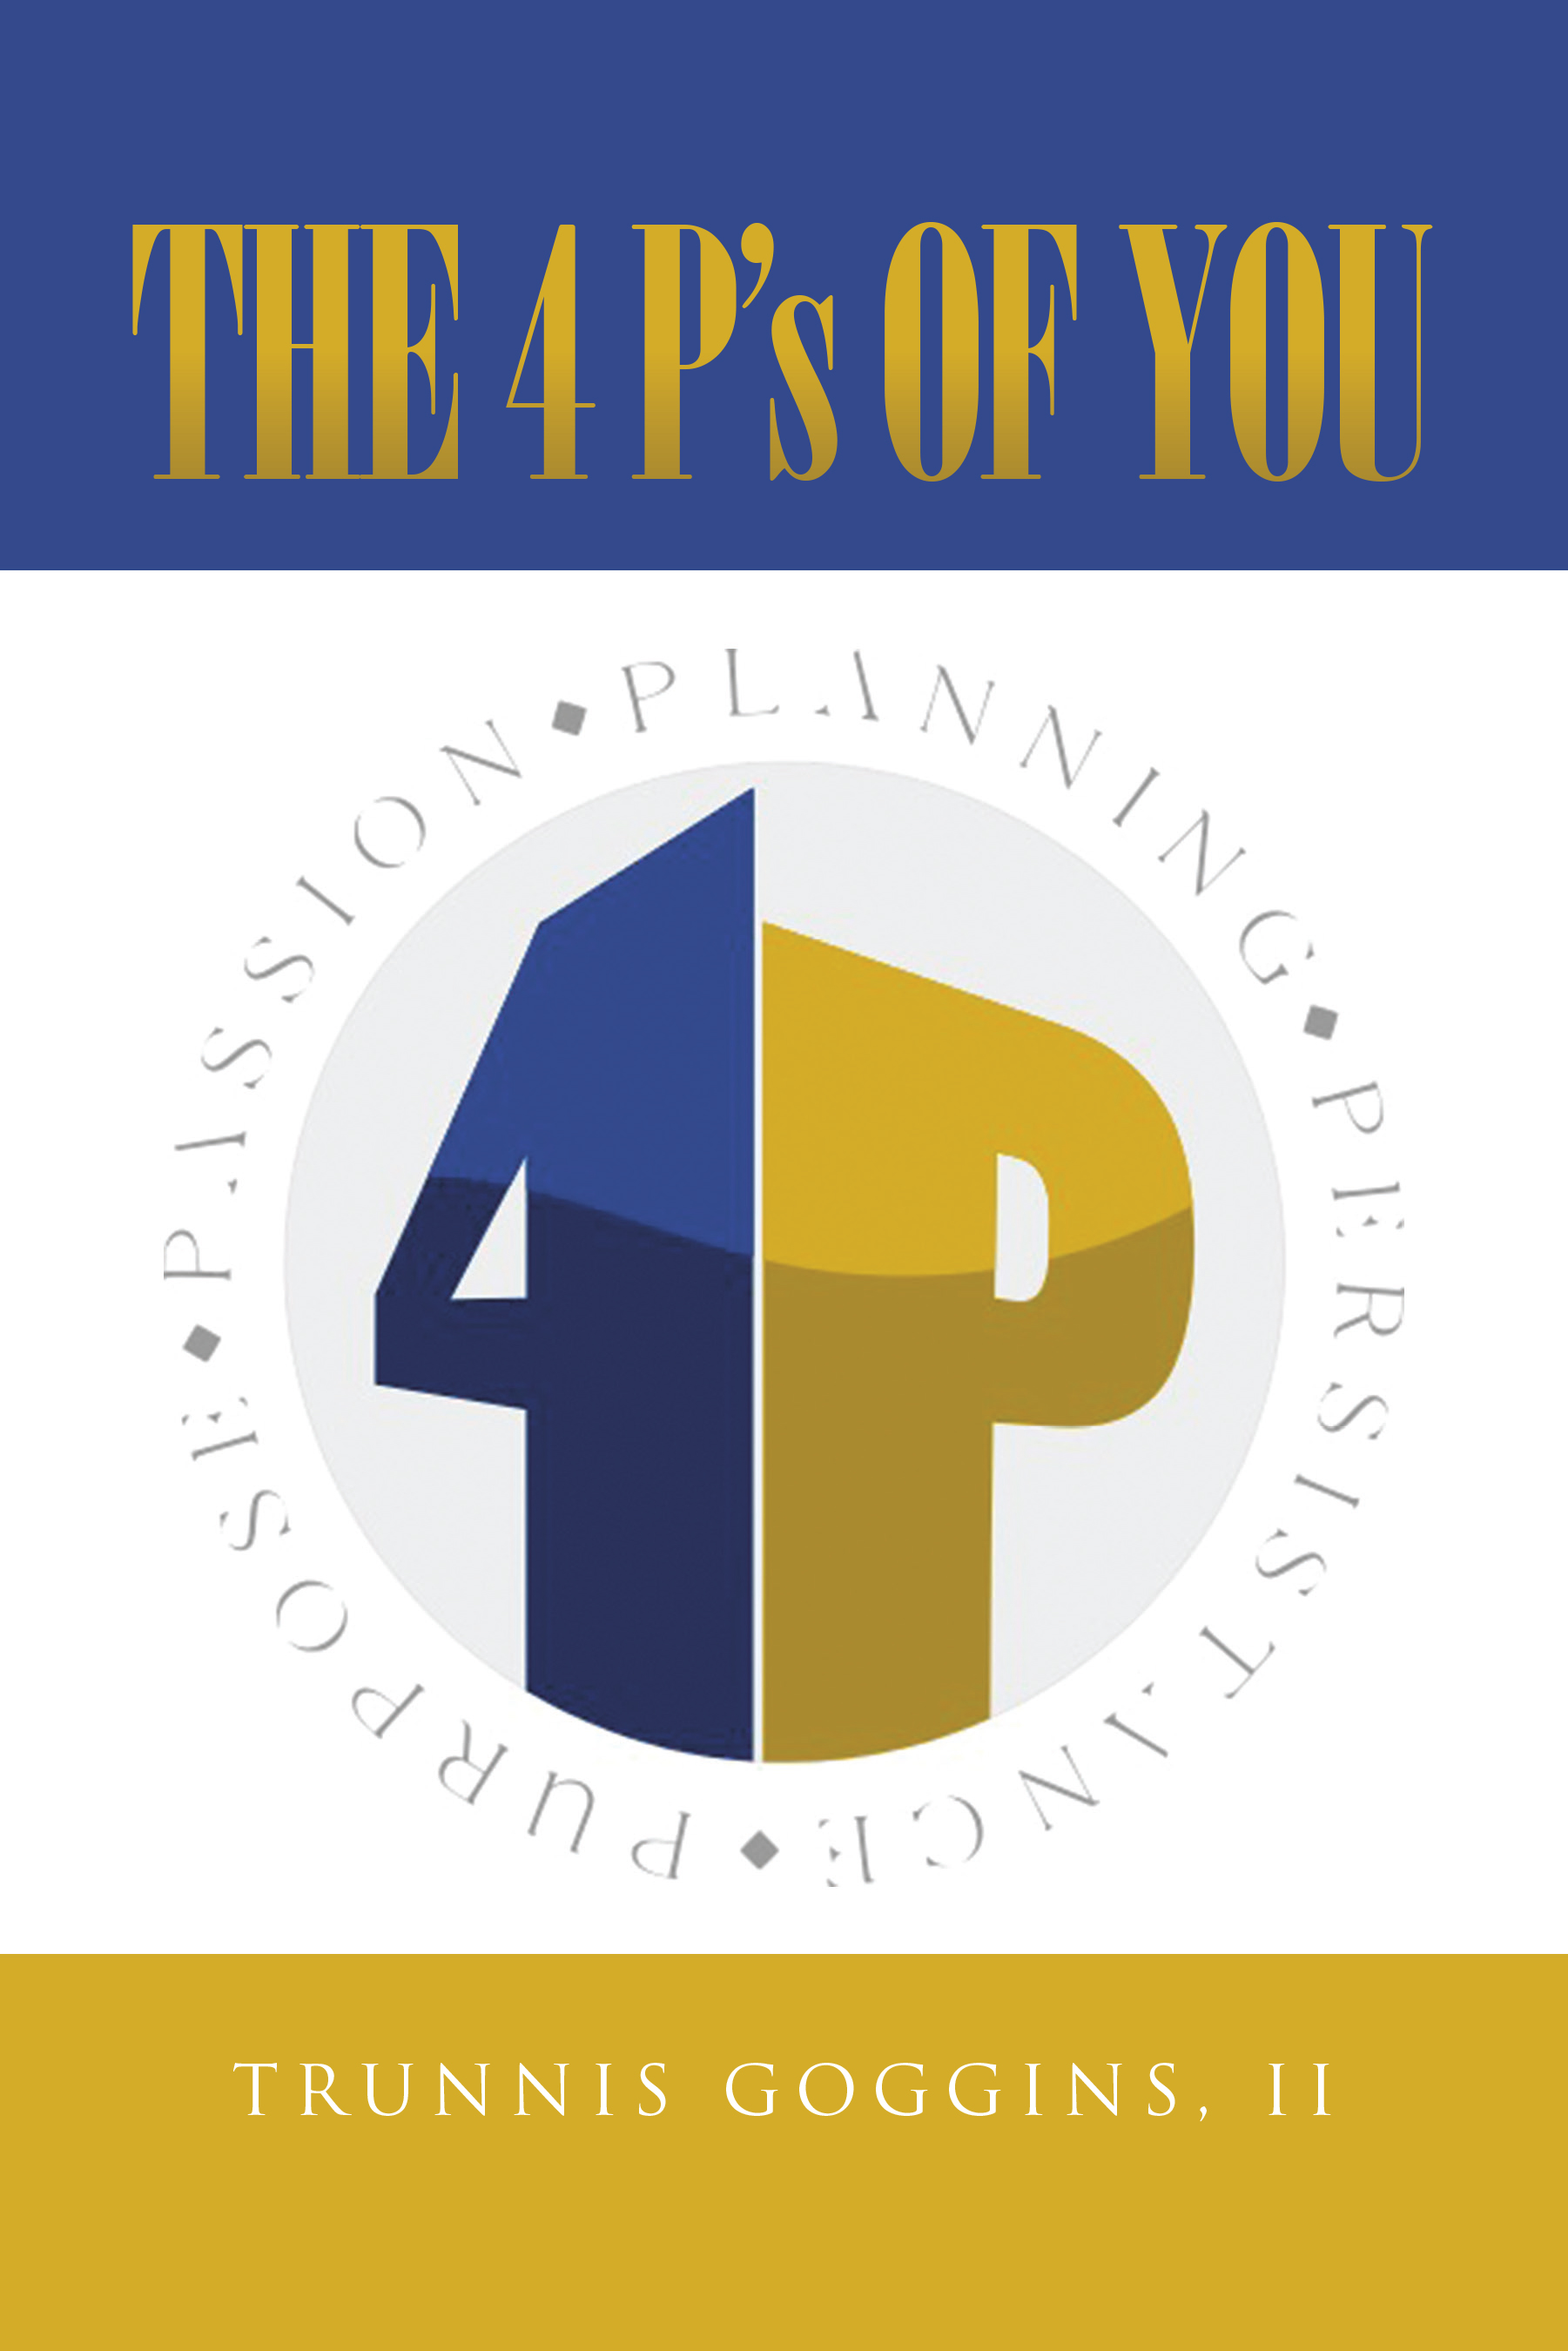 Author Trunnis Goggins, II’s New Book, “The 4 P's of You,” Uses Stories and Examples from the Author’s Life to Help Readers Plan for Their Futures and Purpose